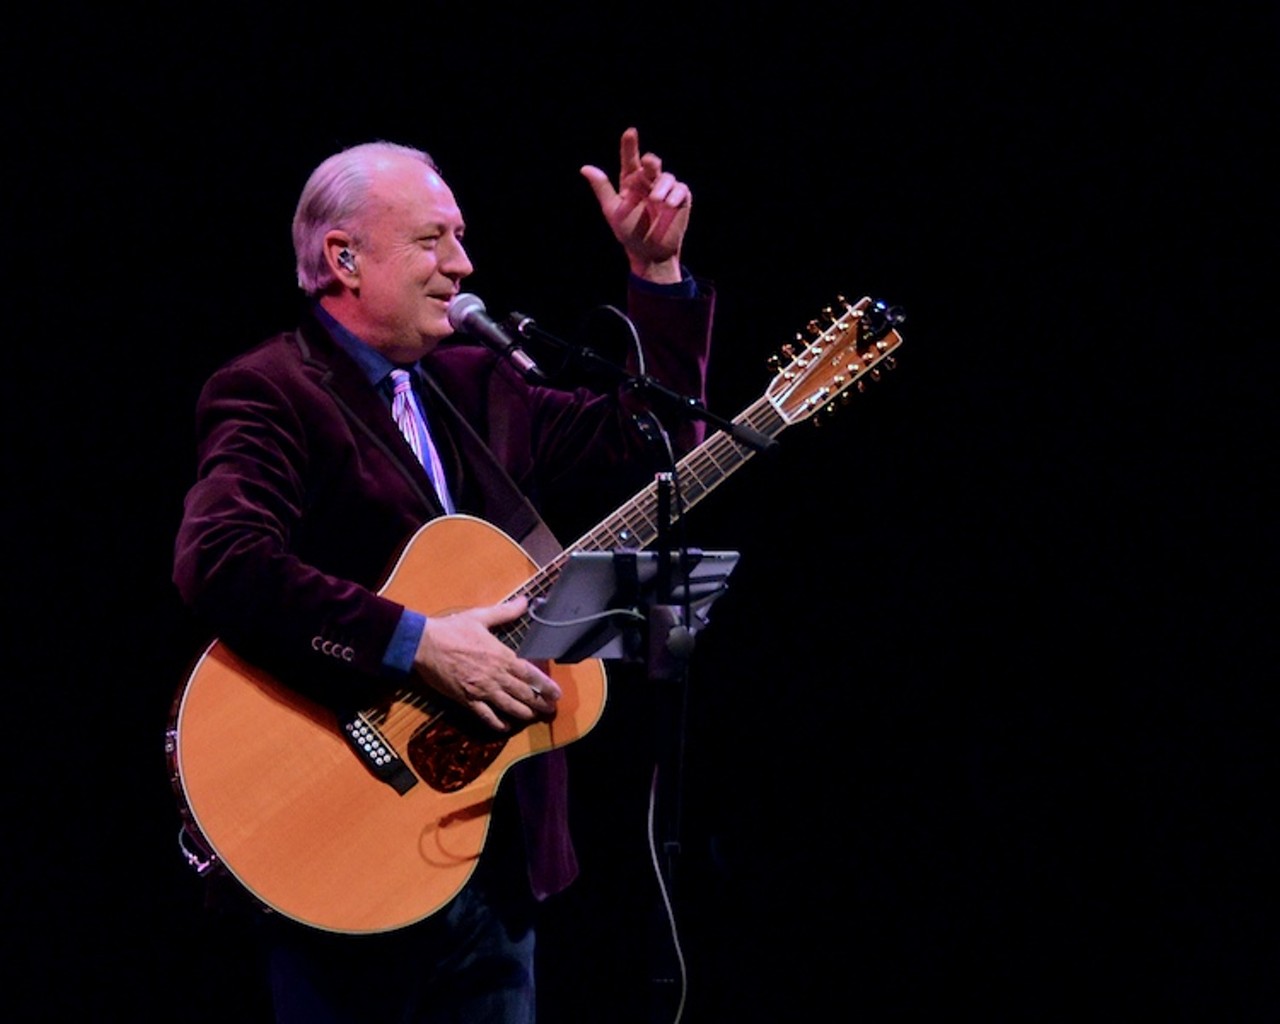 Michael Nesmith performing at the Stocker Center